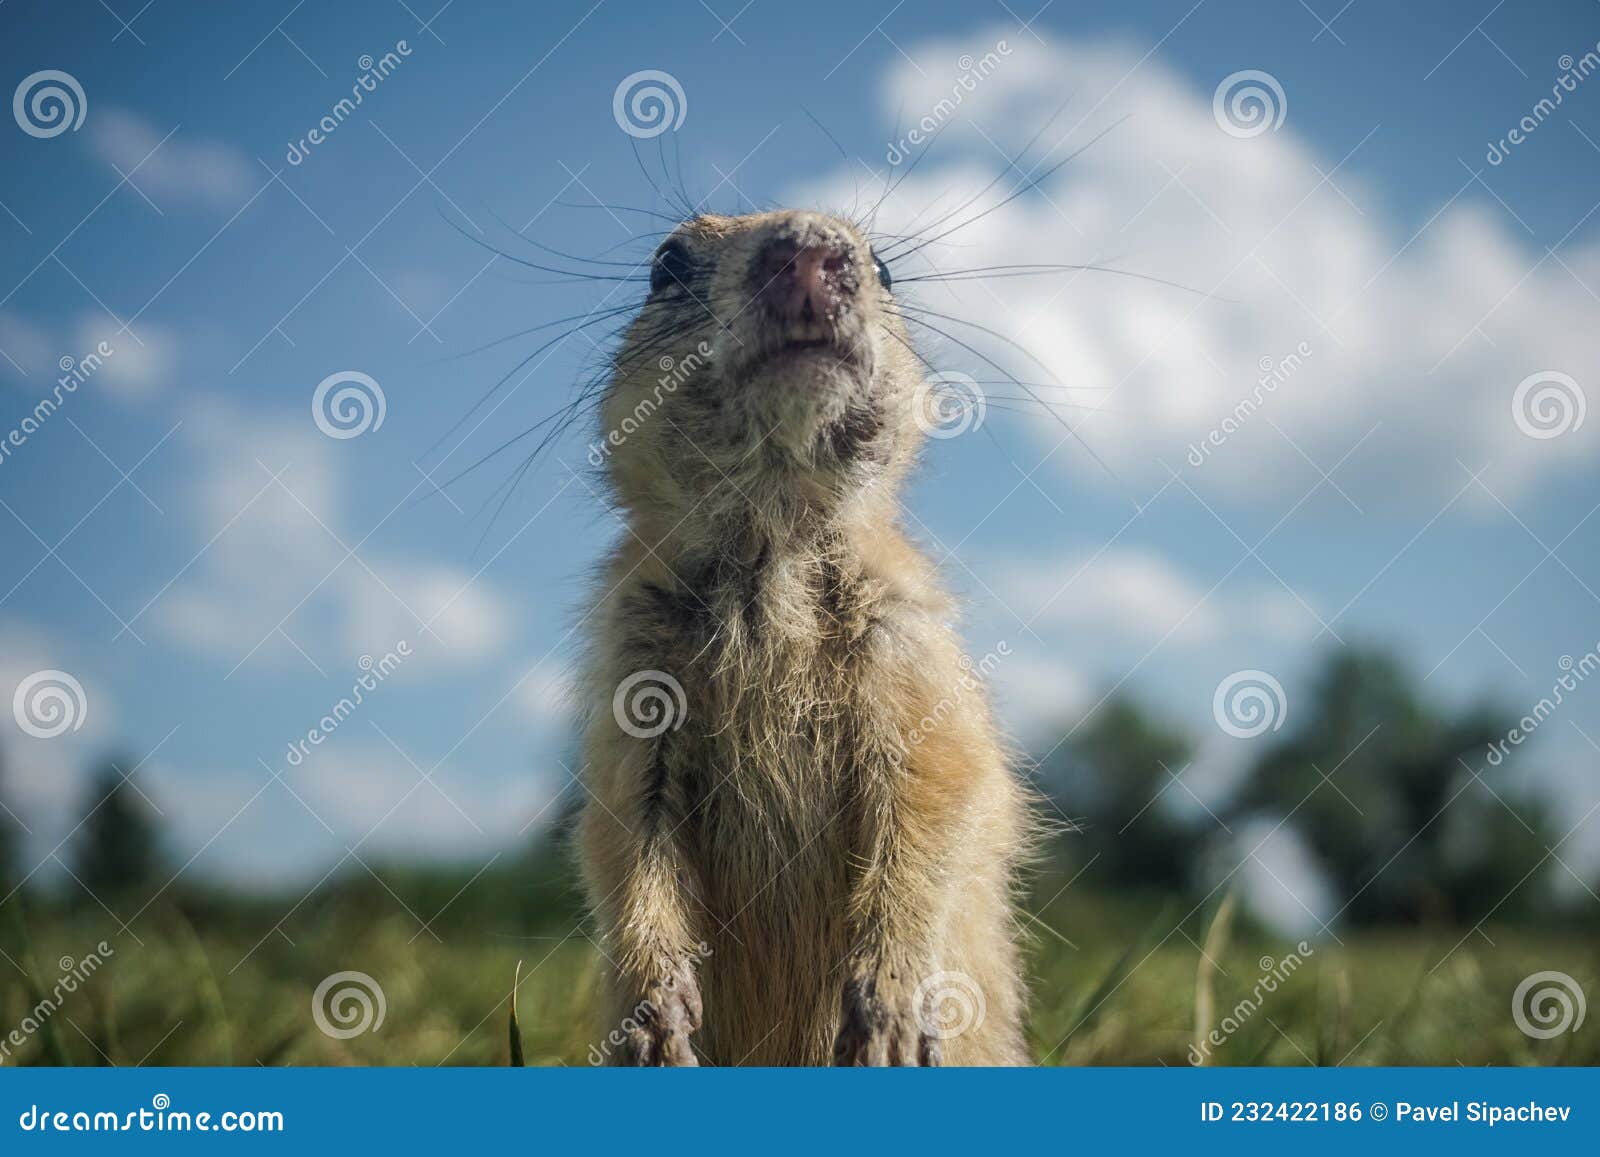 Funny Gopher In The Park Stock Photo Image Of Grass 232422186